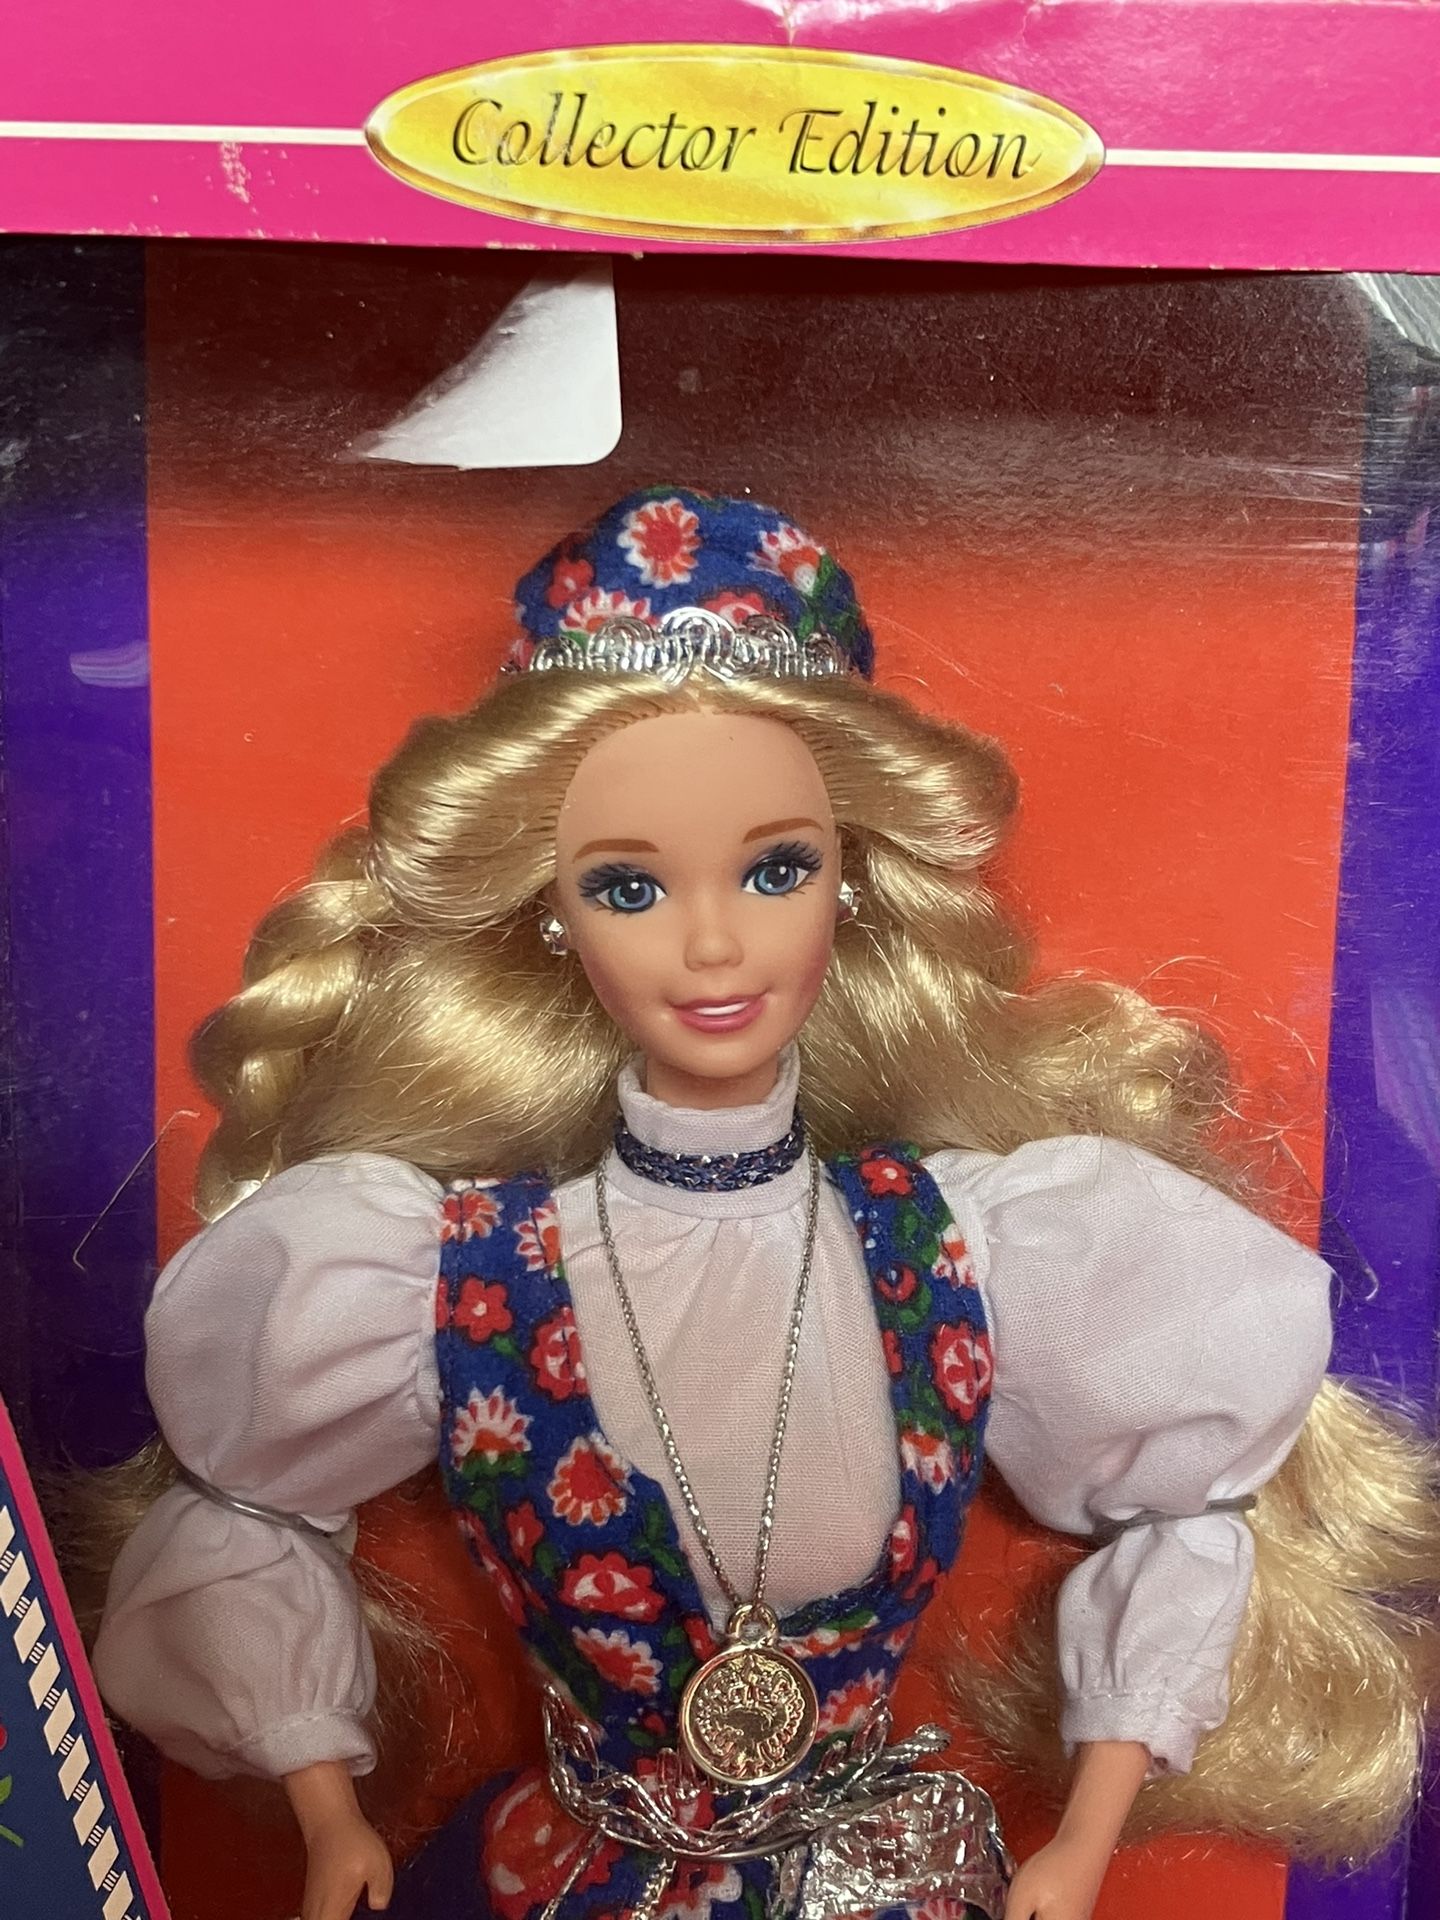 NEW Vintage NORWEGIAN BARBIE DOLL COLLECTOR EDITION ‼️ BOX DAMAGED ‼️ Price Is FIRM ‼️ See HUGE Collection ALL MUST GO ‼️ See Pictures ..